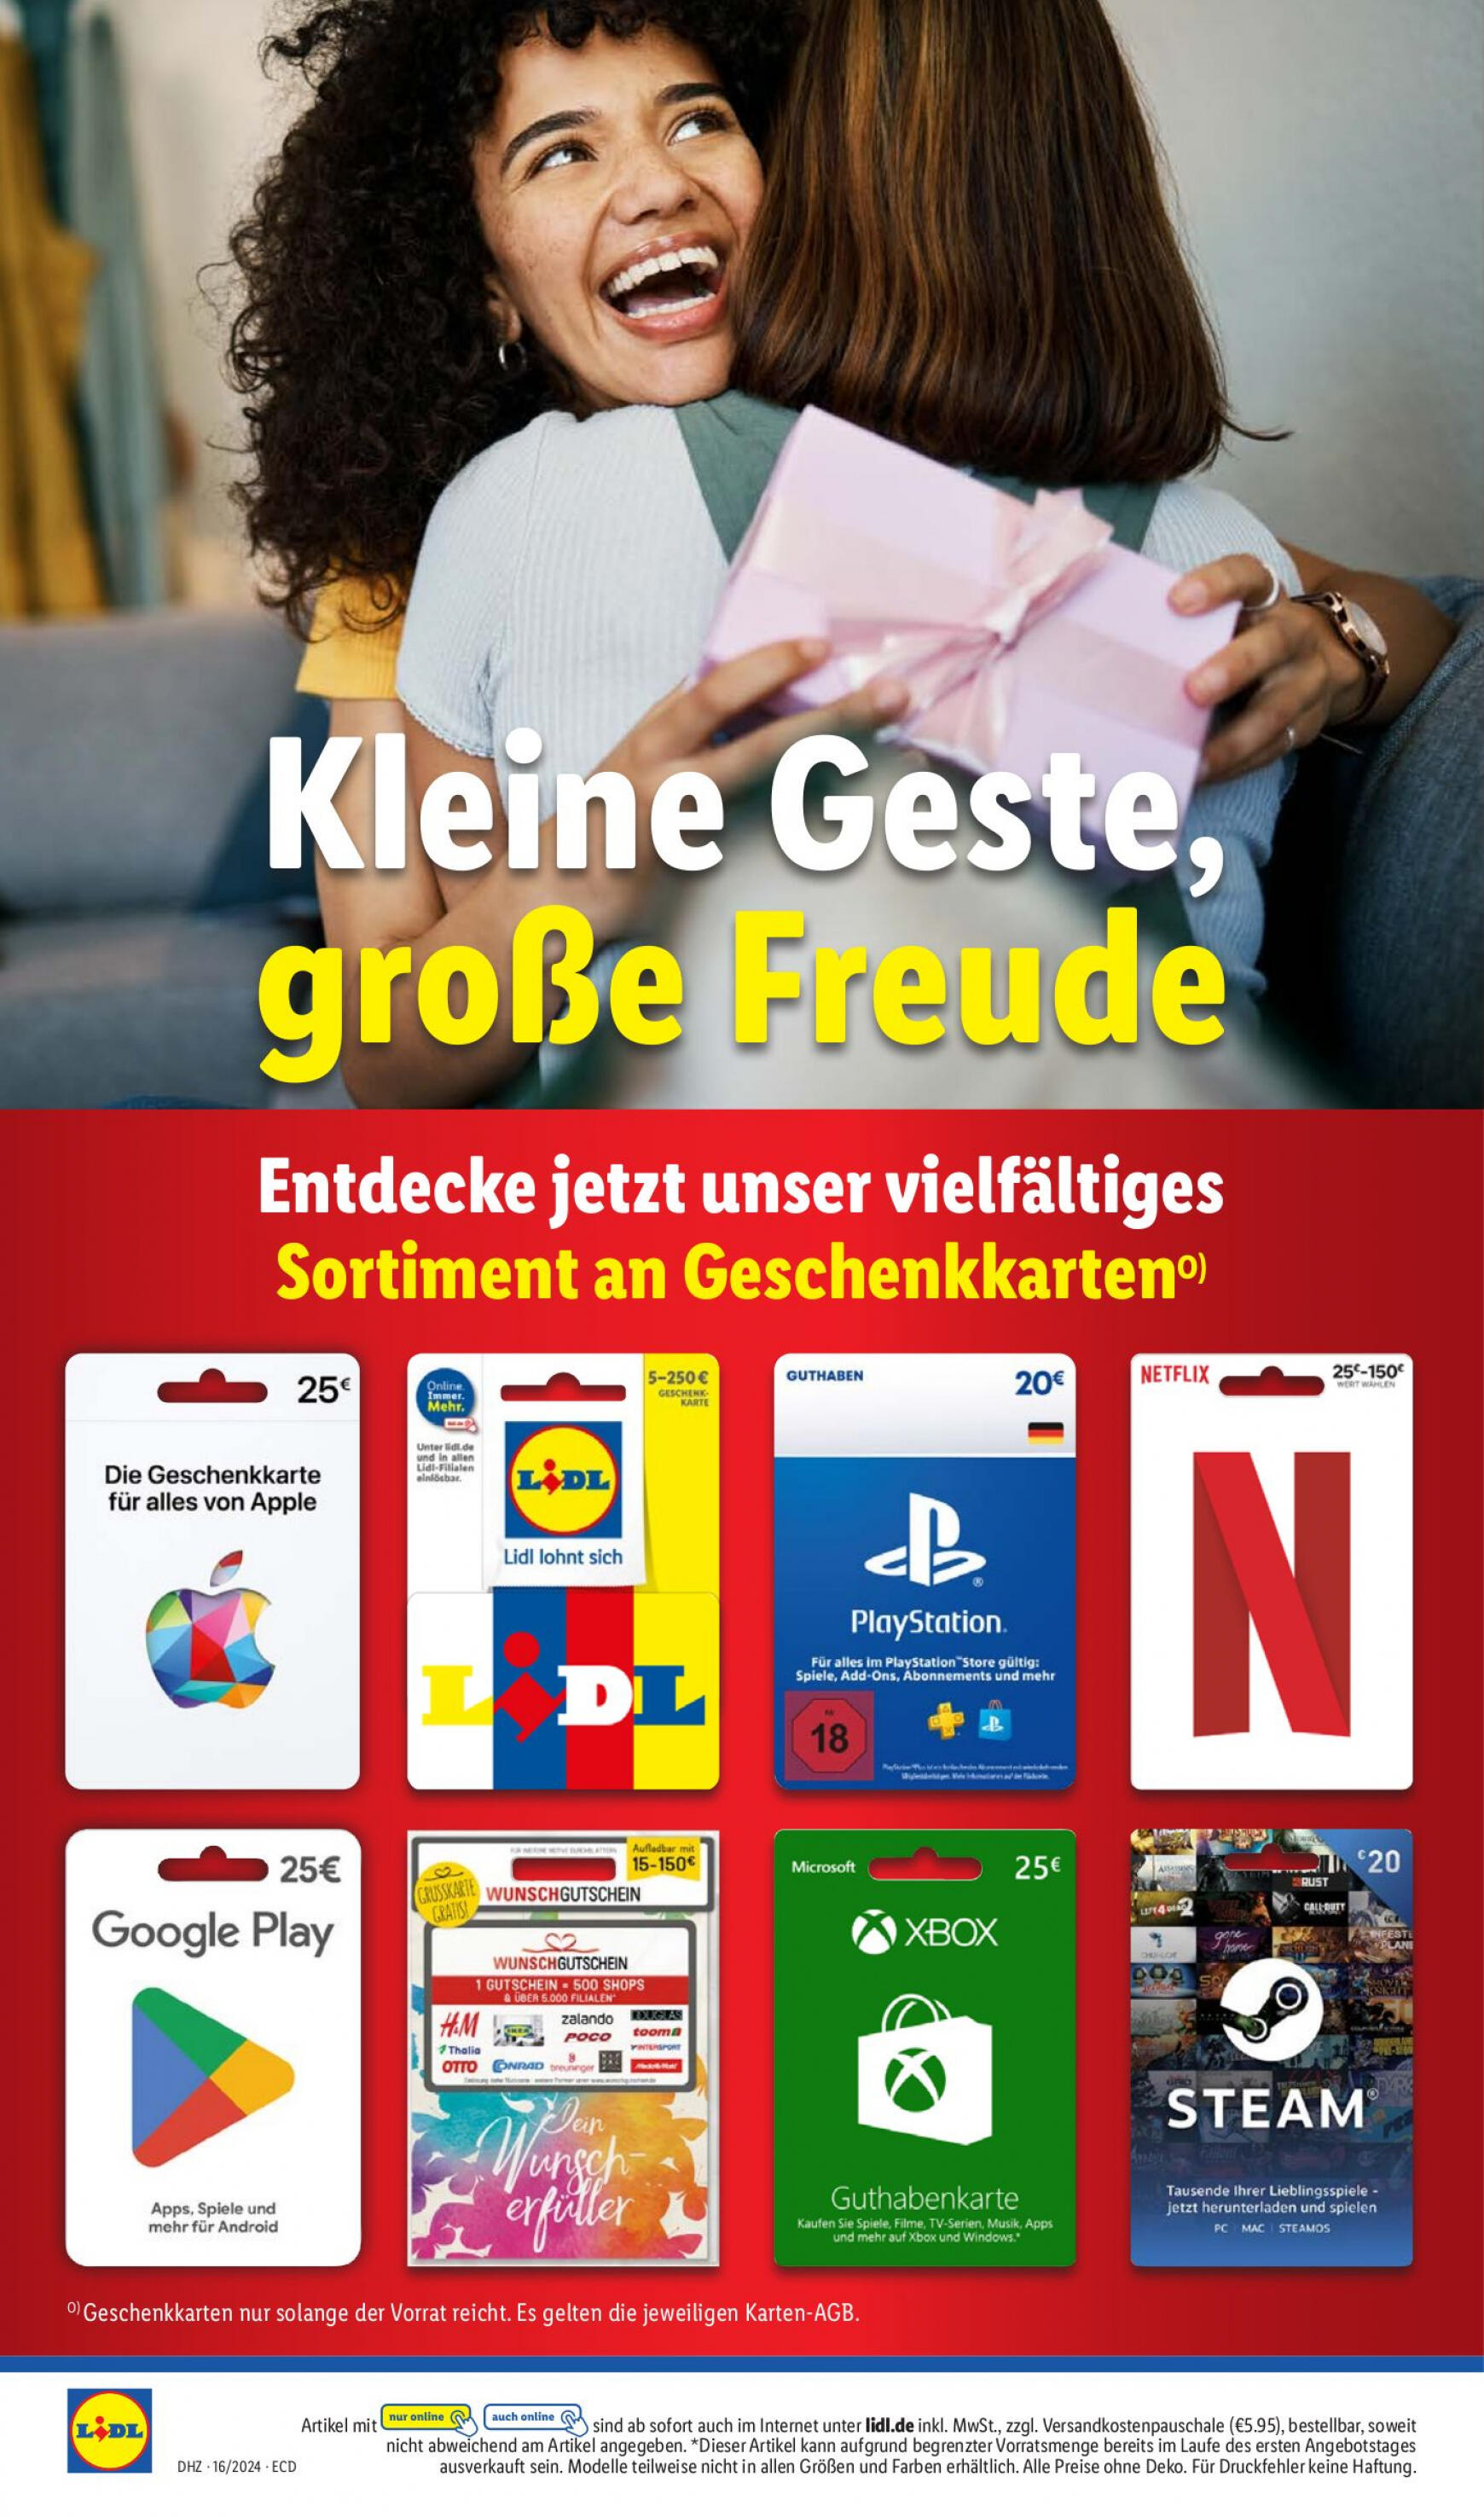 lidl - Flyer Lidl aktuell 15.04. - 20.04. - page: 56